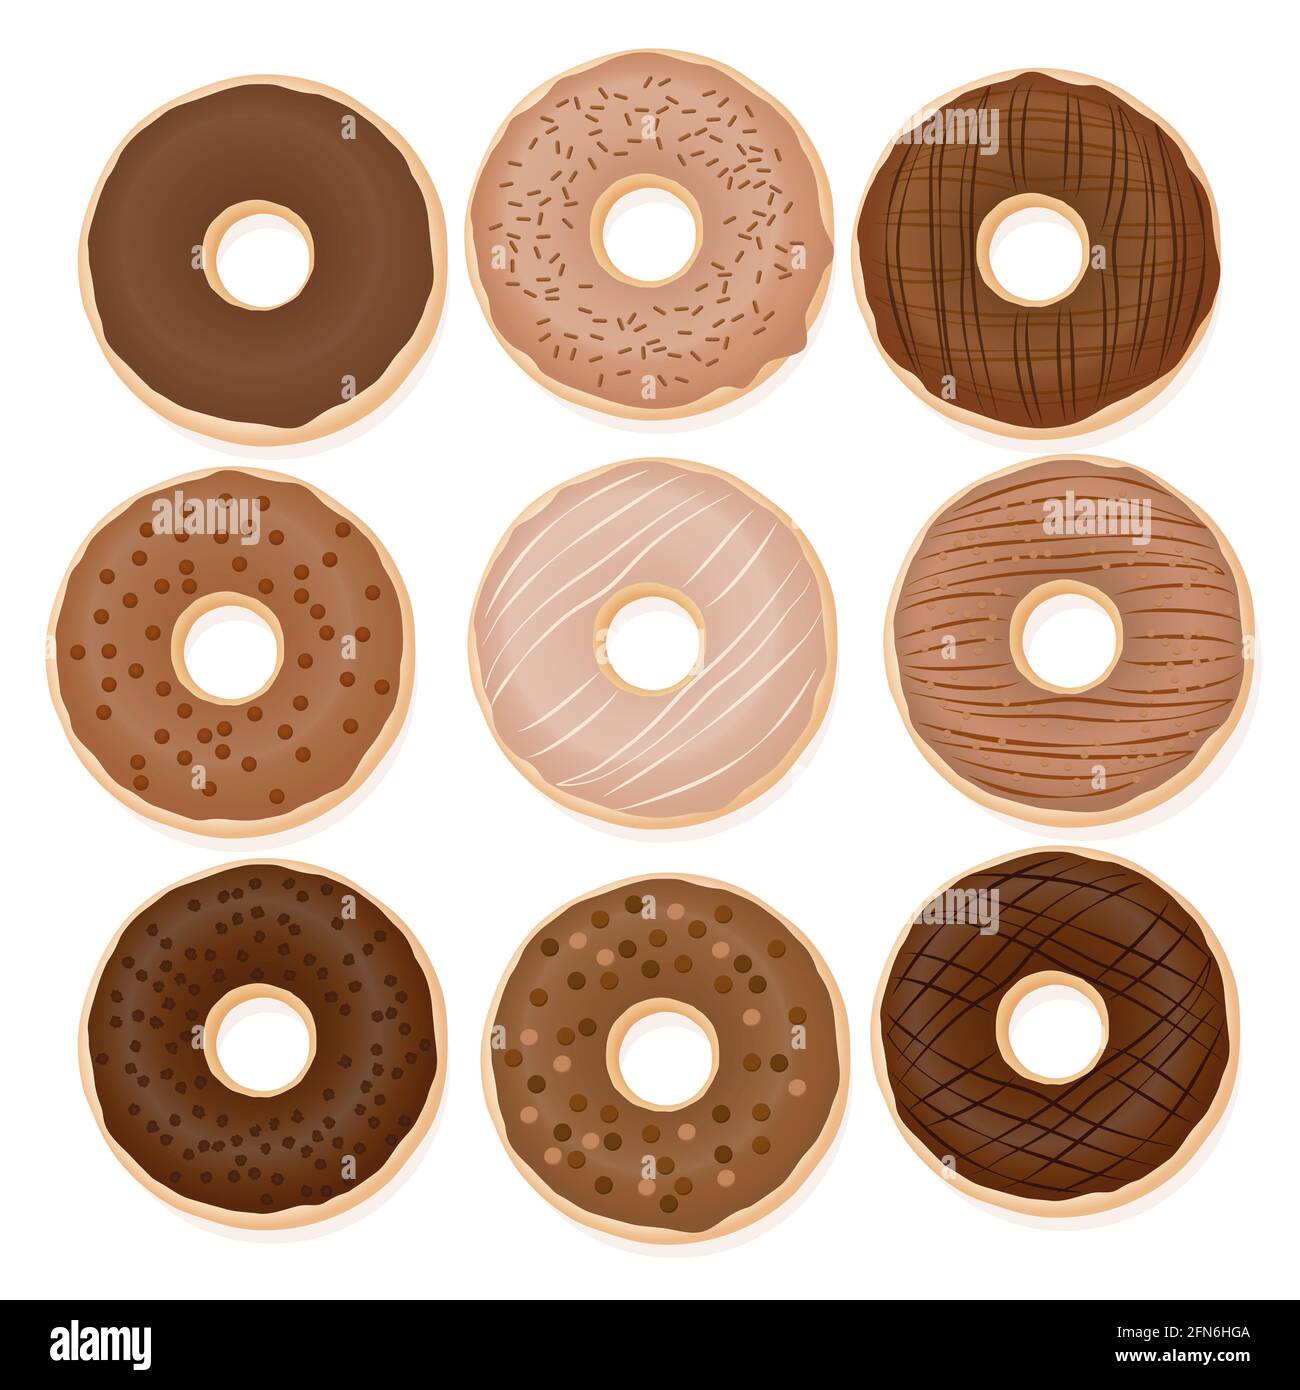 Chocolate donuts. Nine different donuts with glaze from light to dark brown chocolate - illustration on white background. Stock Photo